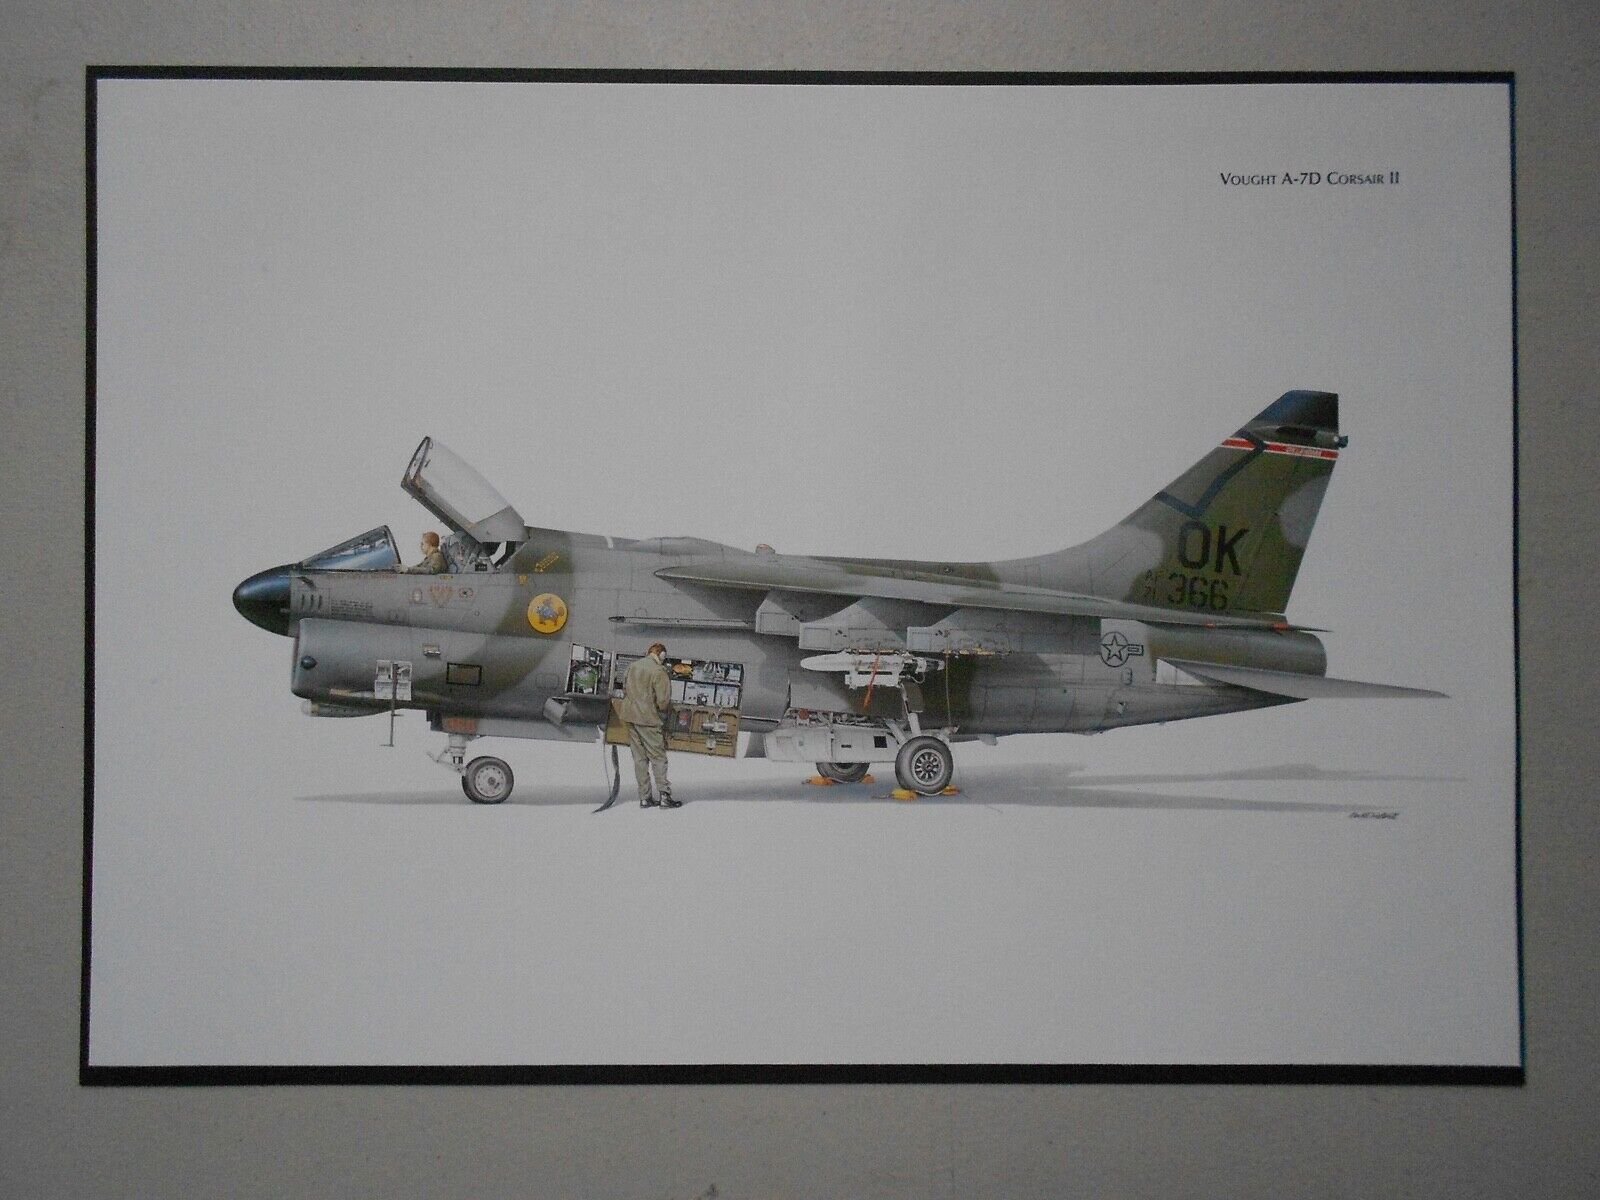 MILITARY AVIATION PRINT : VOUGHT A-7D CORSAIR II -125 TACTICAL FIGHTER SQN 1990s